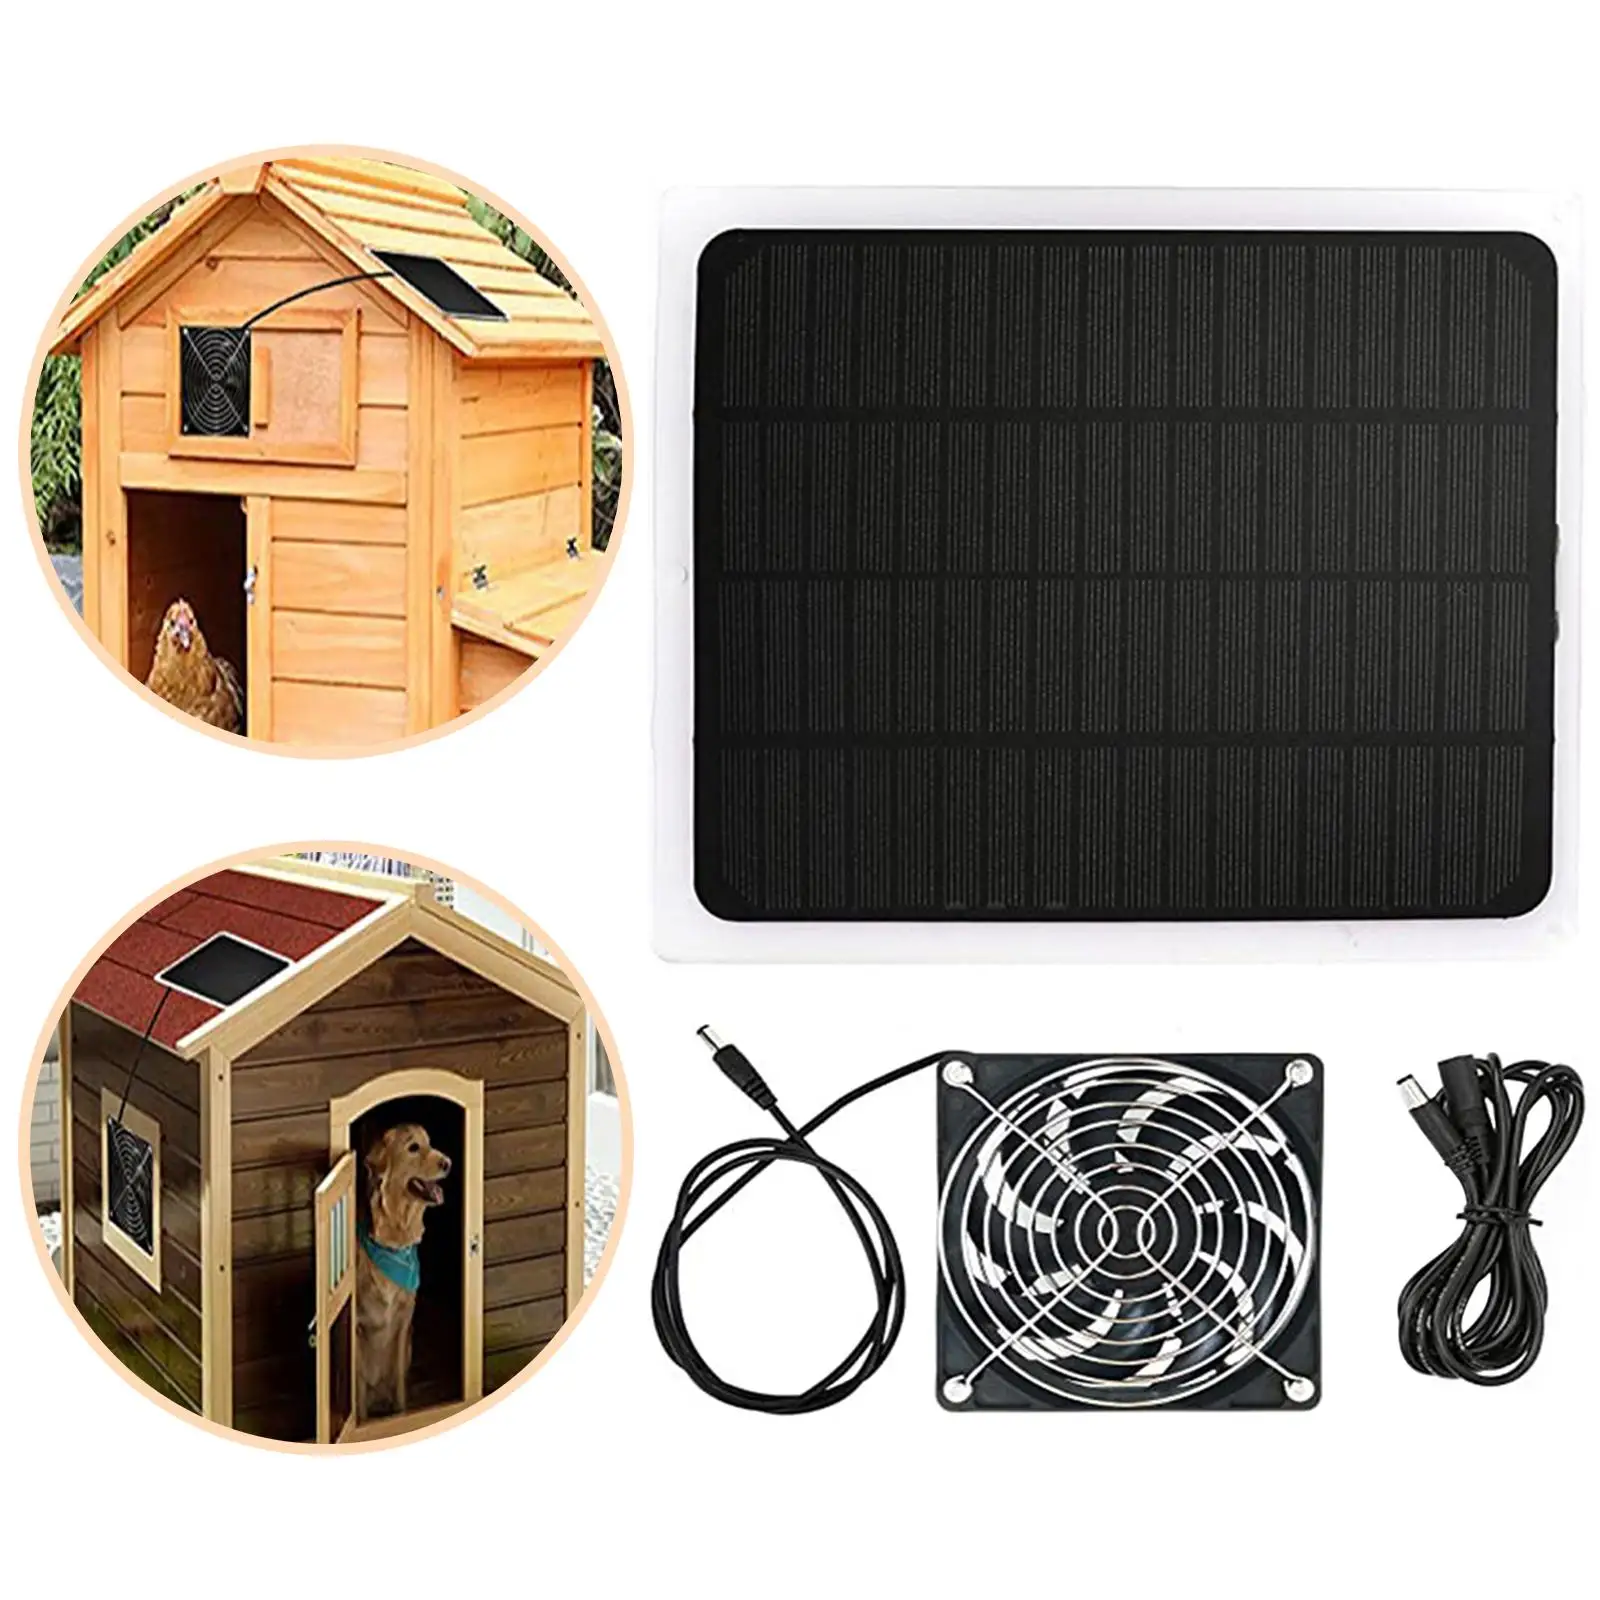 Portable Solar Powered Fan Kit Extractor Fan Air Ventilator Solar Panel Exhaust Fan for Chicken Coop Poultry House Shed Roofs RV